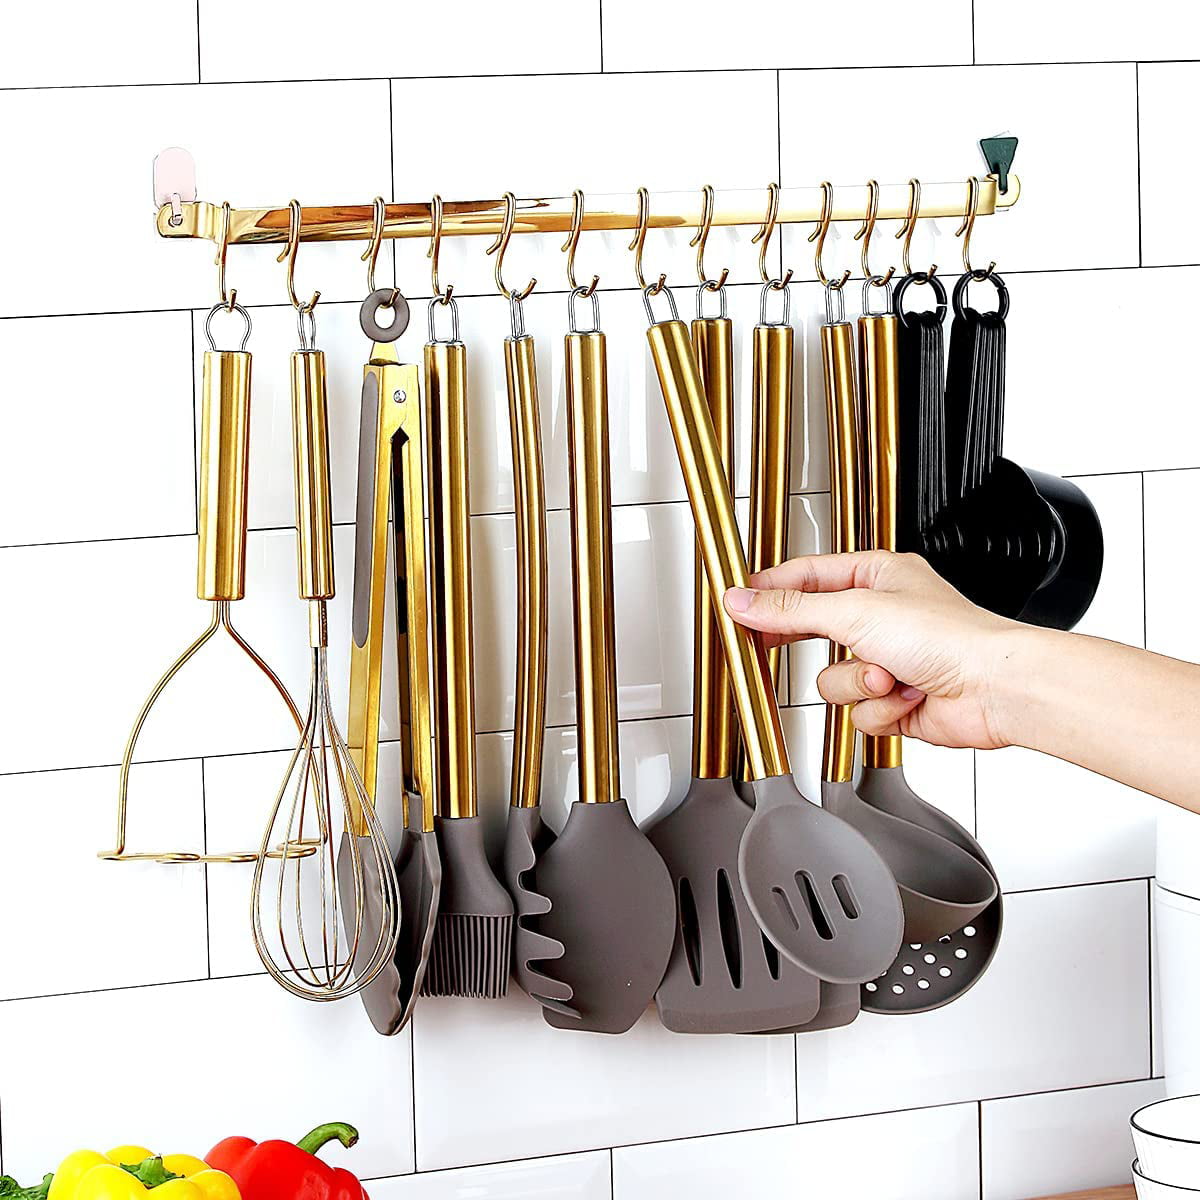 US$ 34.99 - Cooking Utensils Set, 38 Pieces Silicone Kitchen Utensil With  Holder - m.